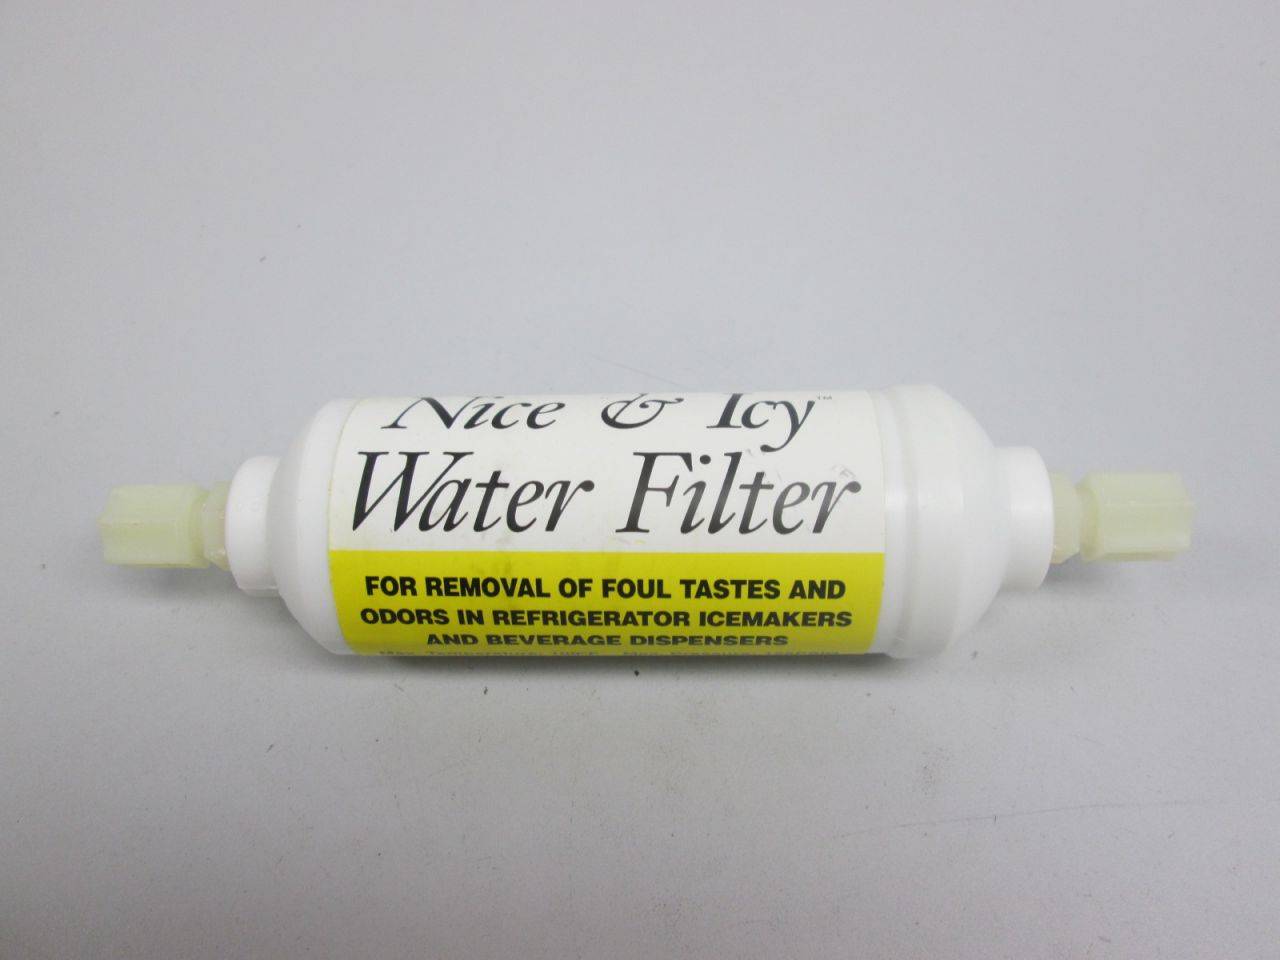 Campbell IC6 Nice & Icy Disposable Filter